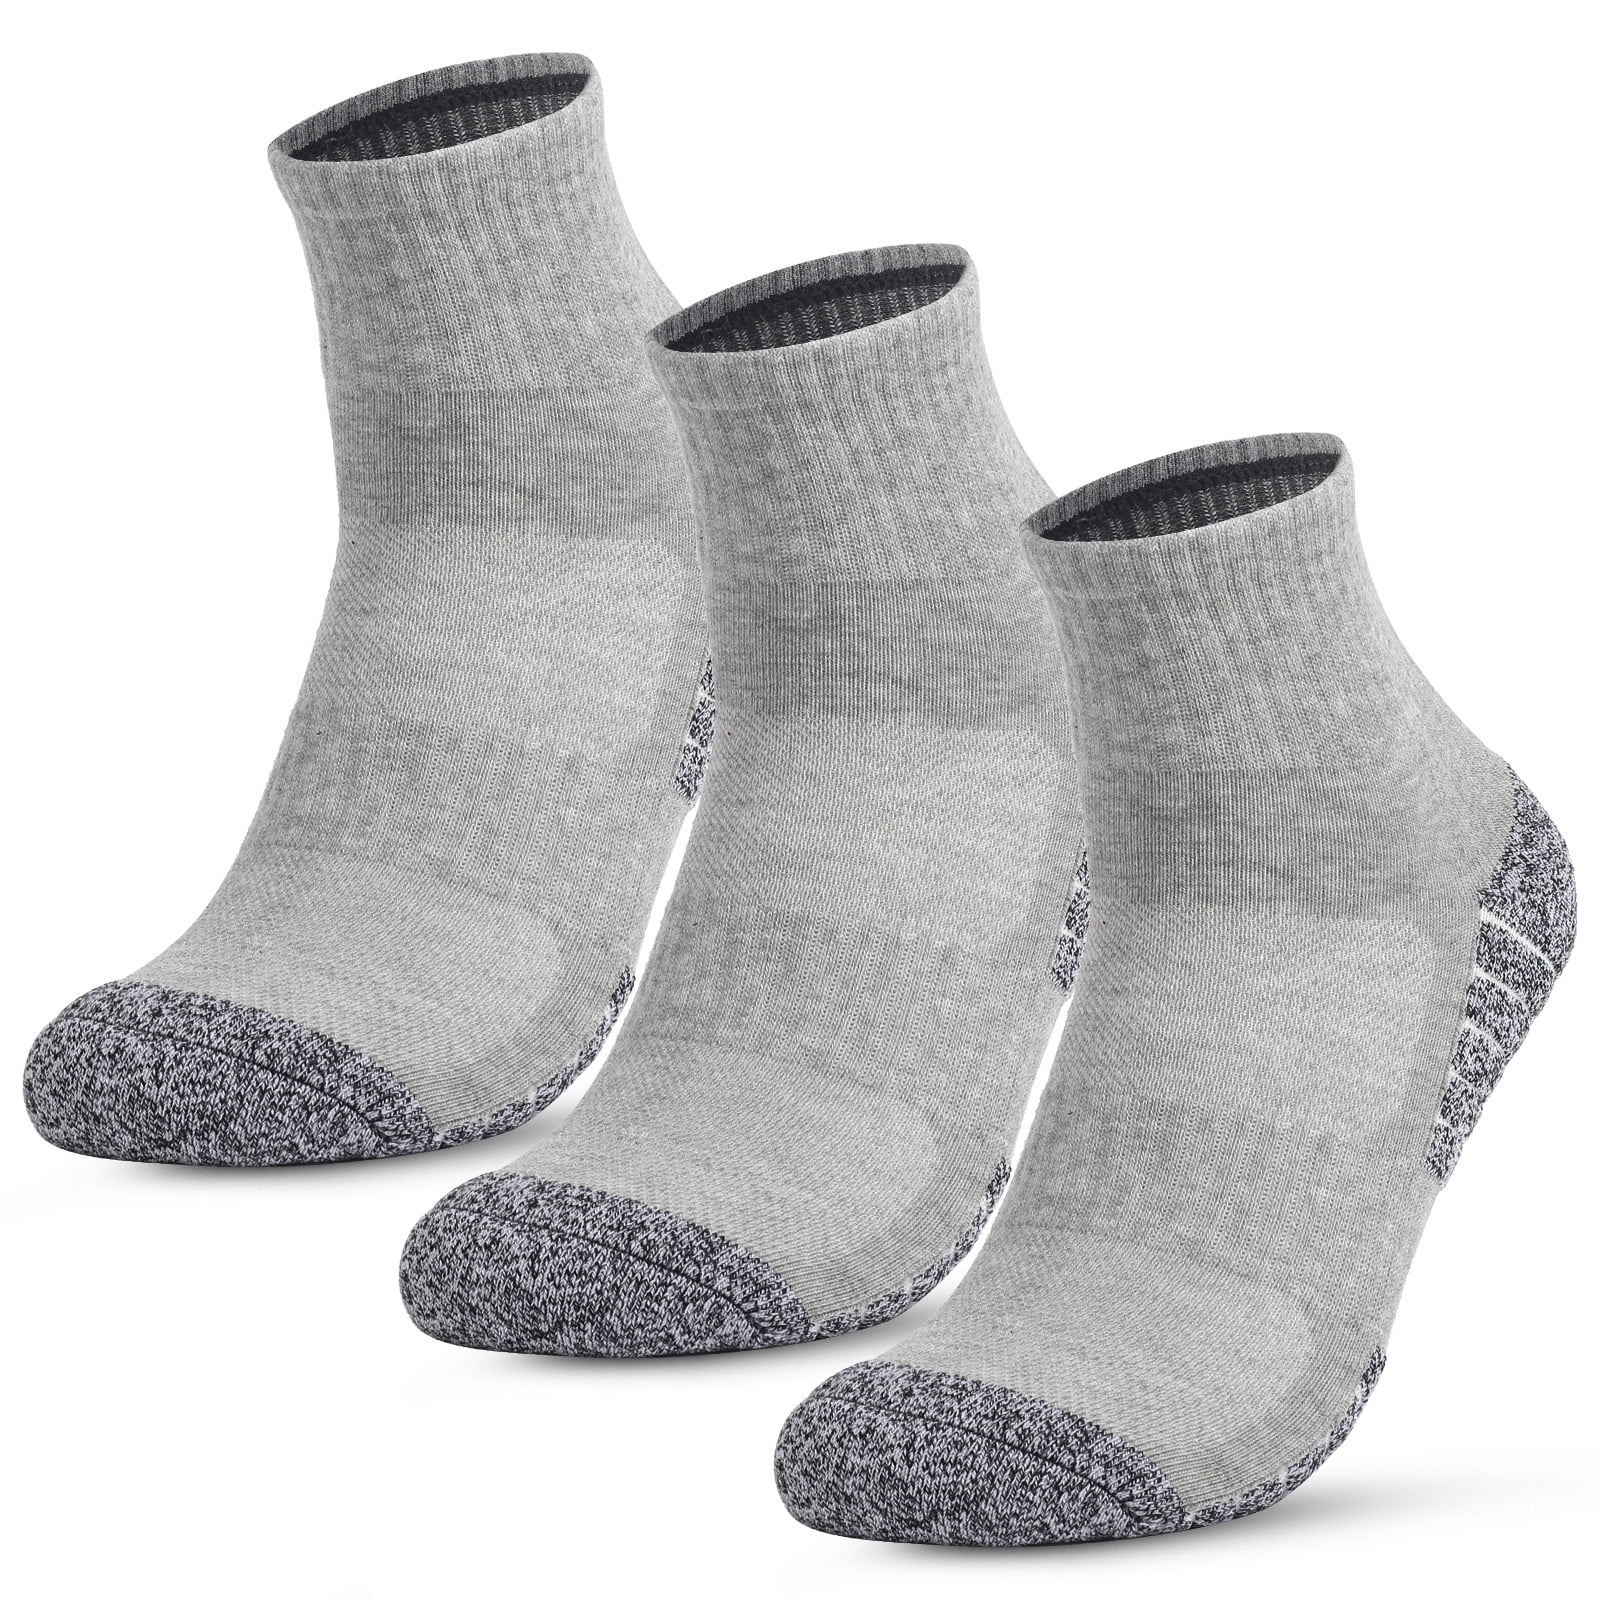 ametoys Men 3 Pairs Cushioned Hiking Socks Casual Cotton Crew Socks for ...